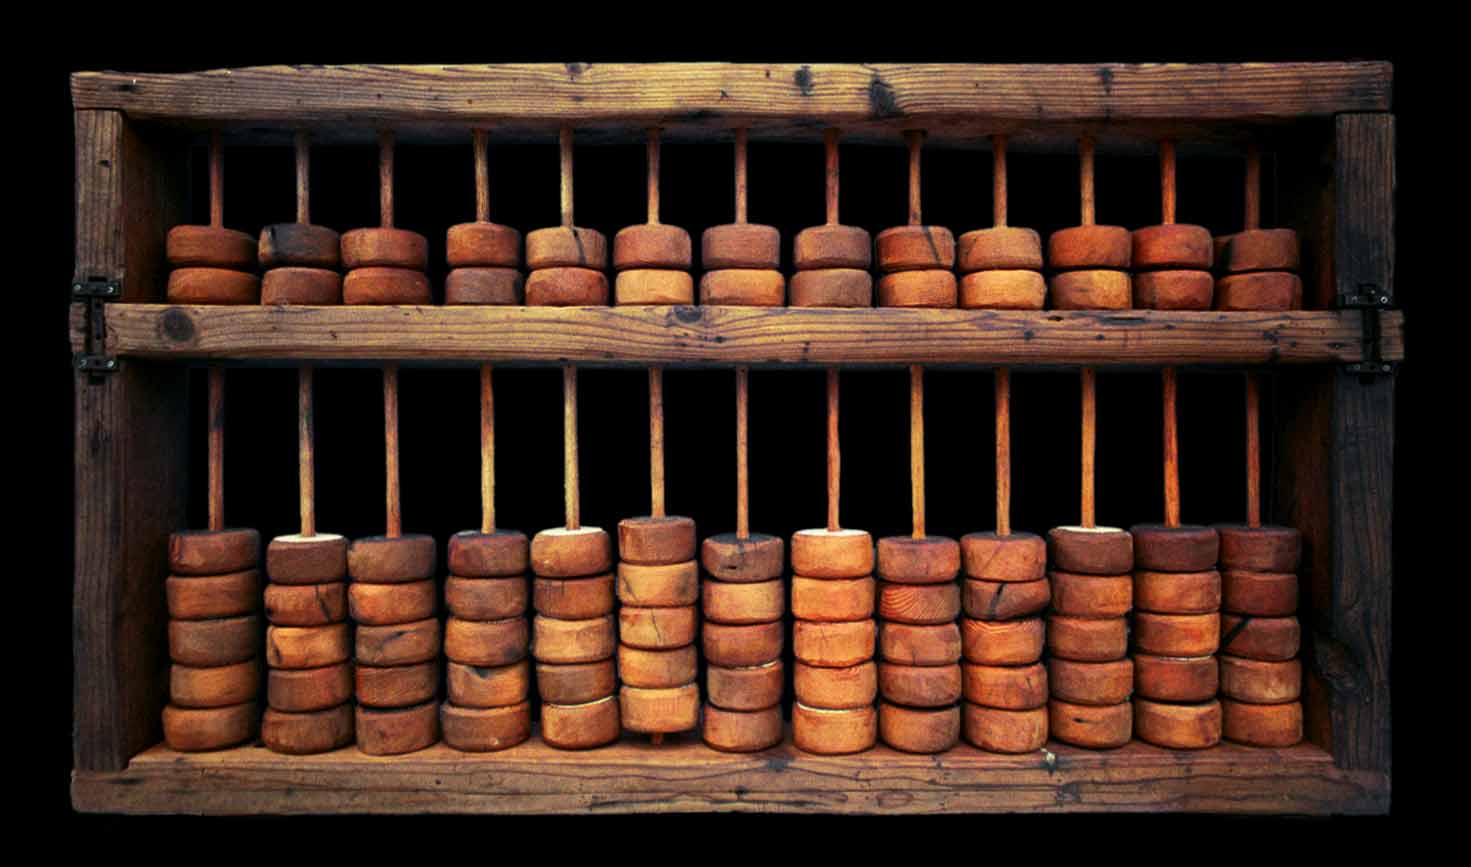 chinese abacus subtraciton